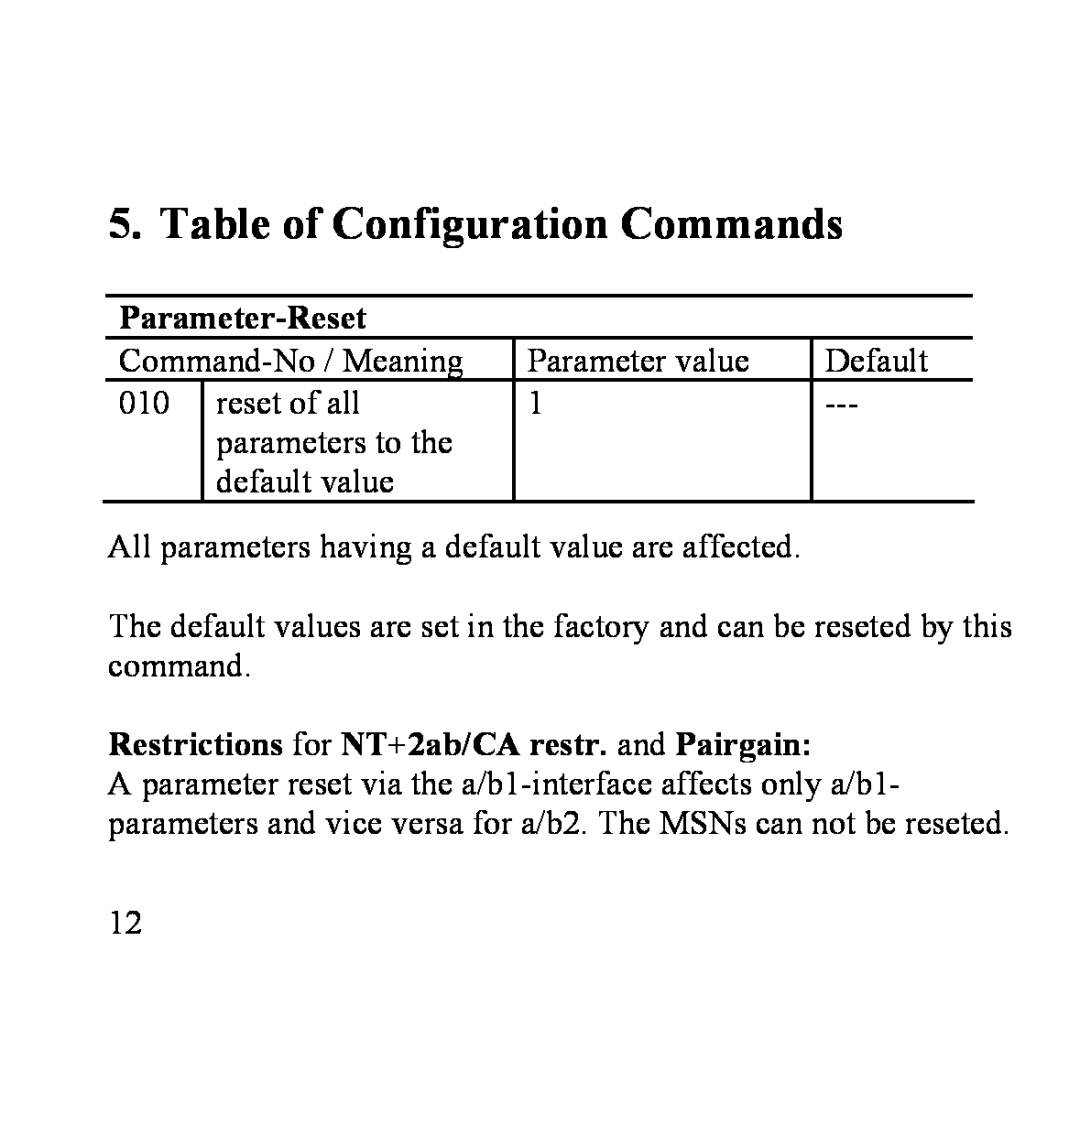 Siemens SANTIS-ab Table of Configuration Commands, Parameter-Reset, Restrictions for NT+2ab/CA restr. and Pairgain 